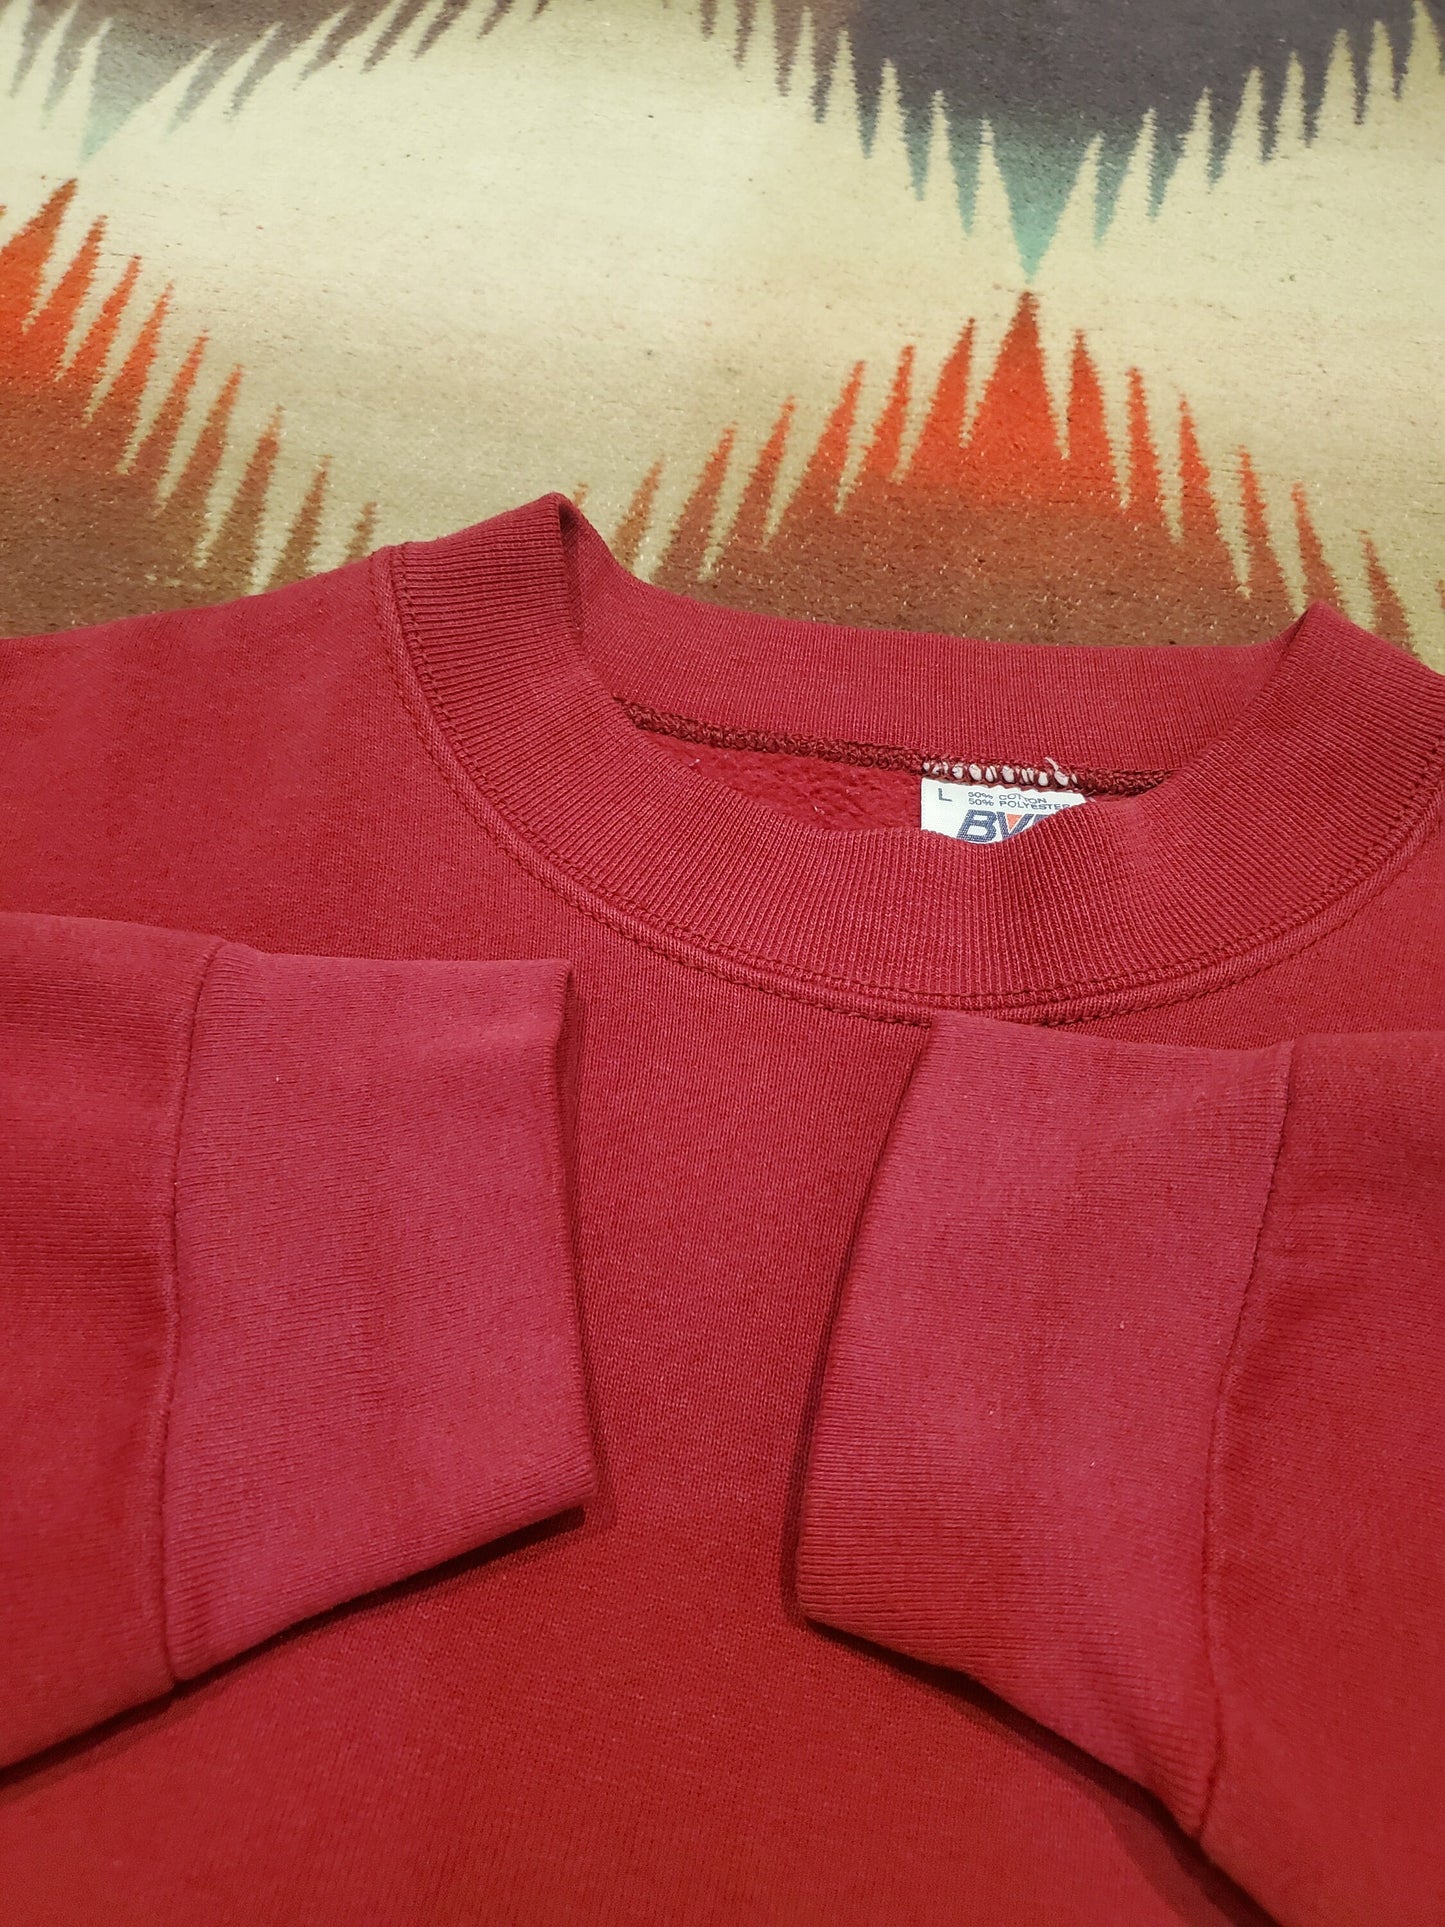 1990s BVD Blank Red Sweatshirt Made in USA Size L